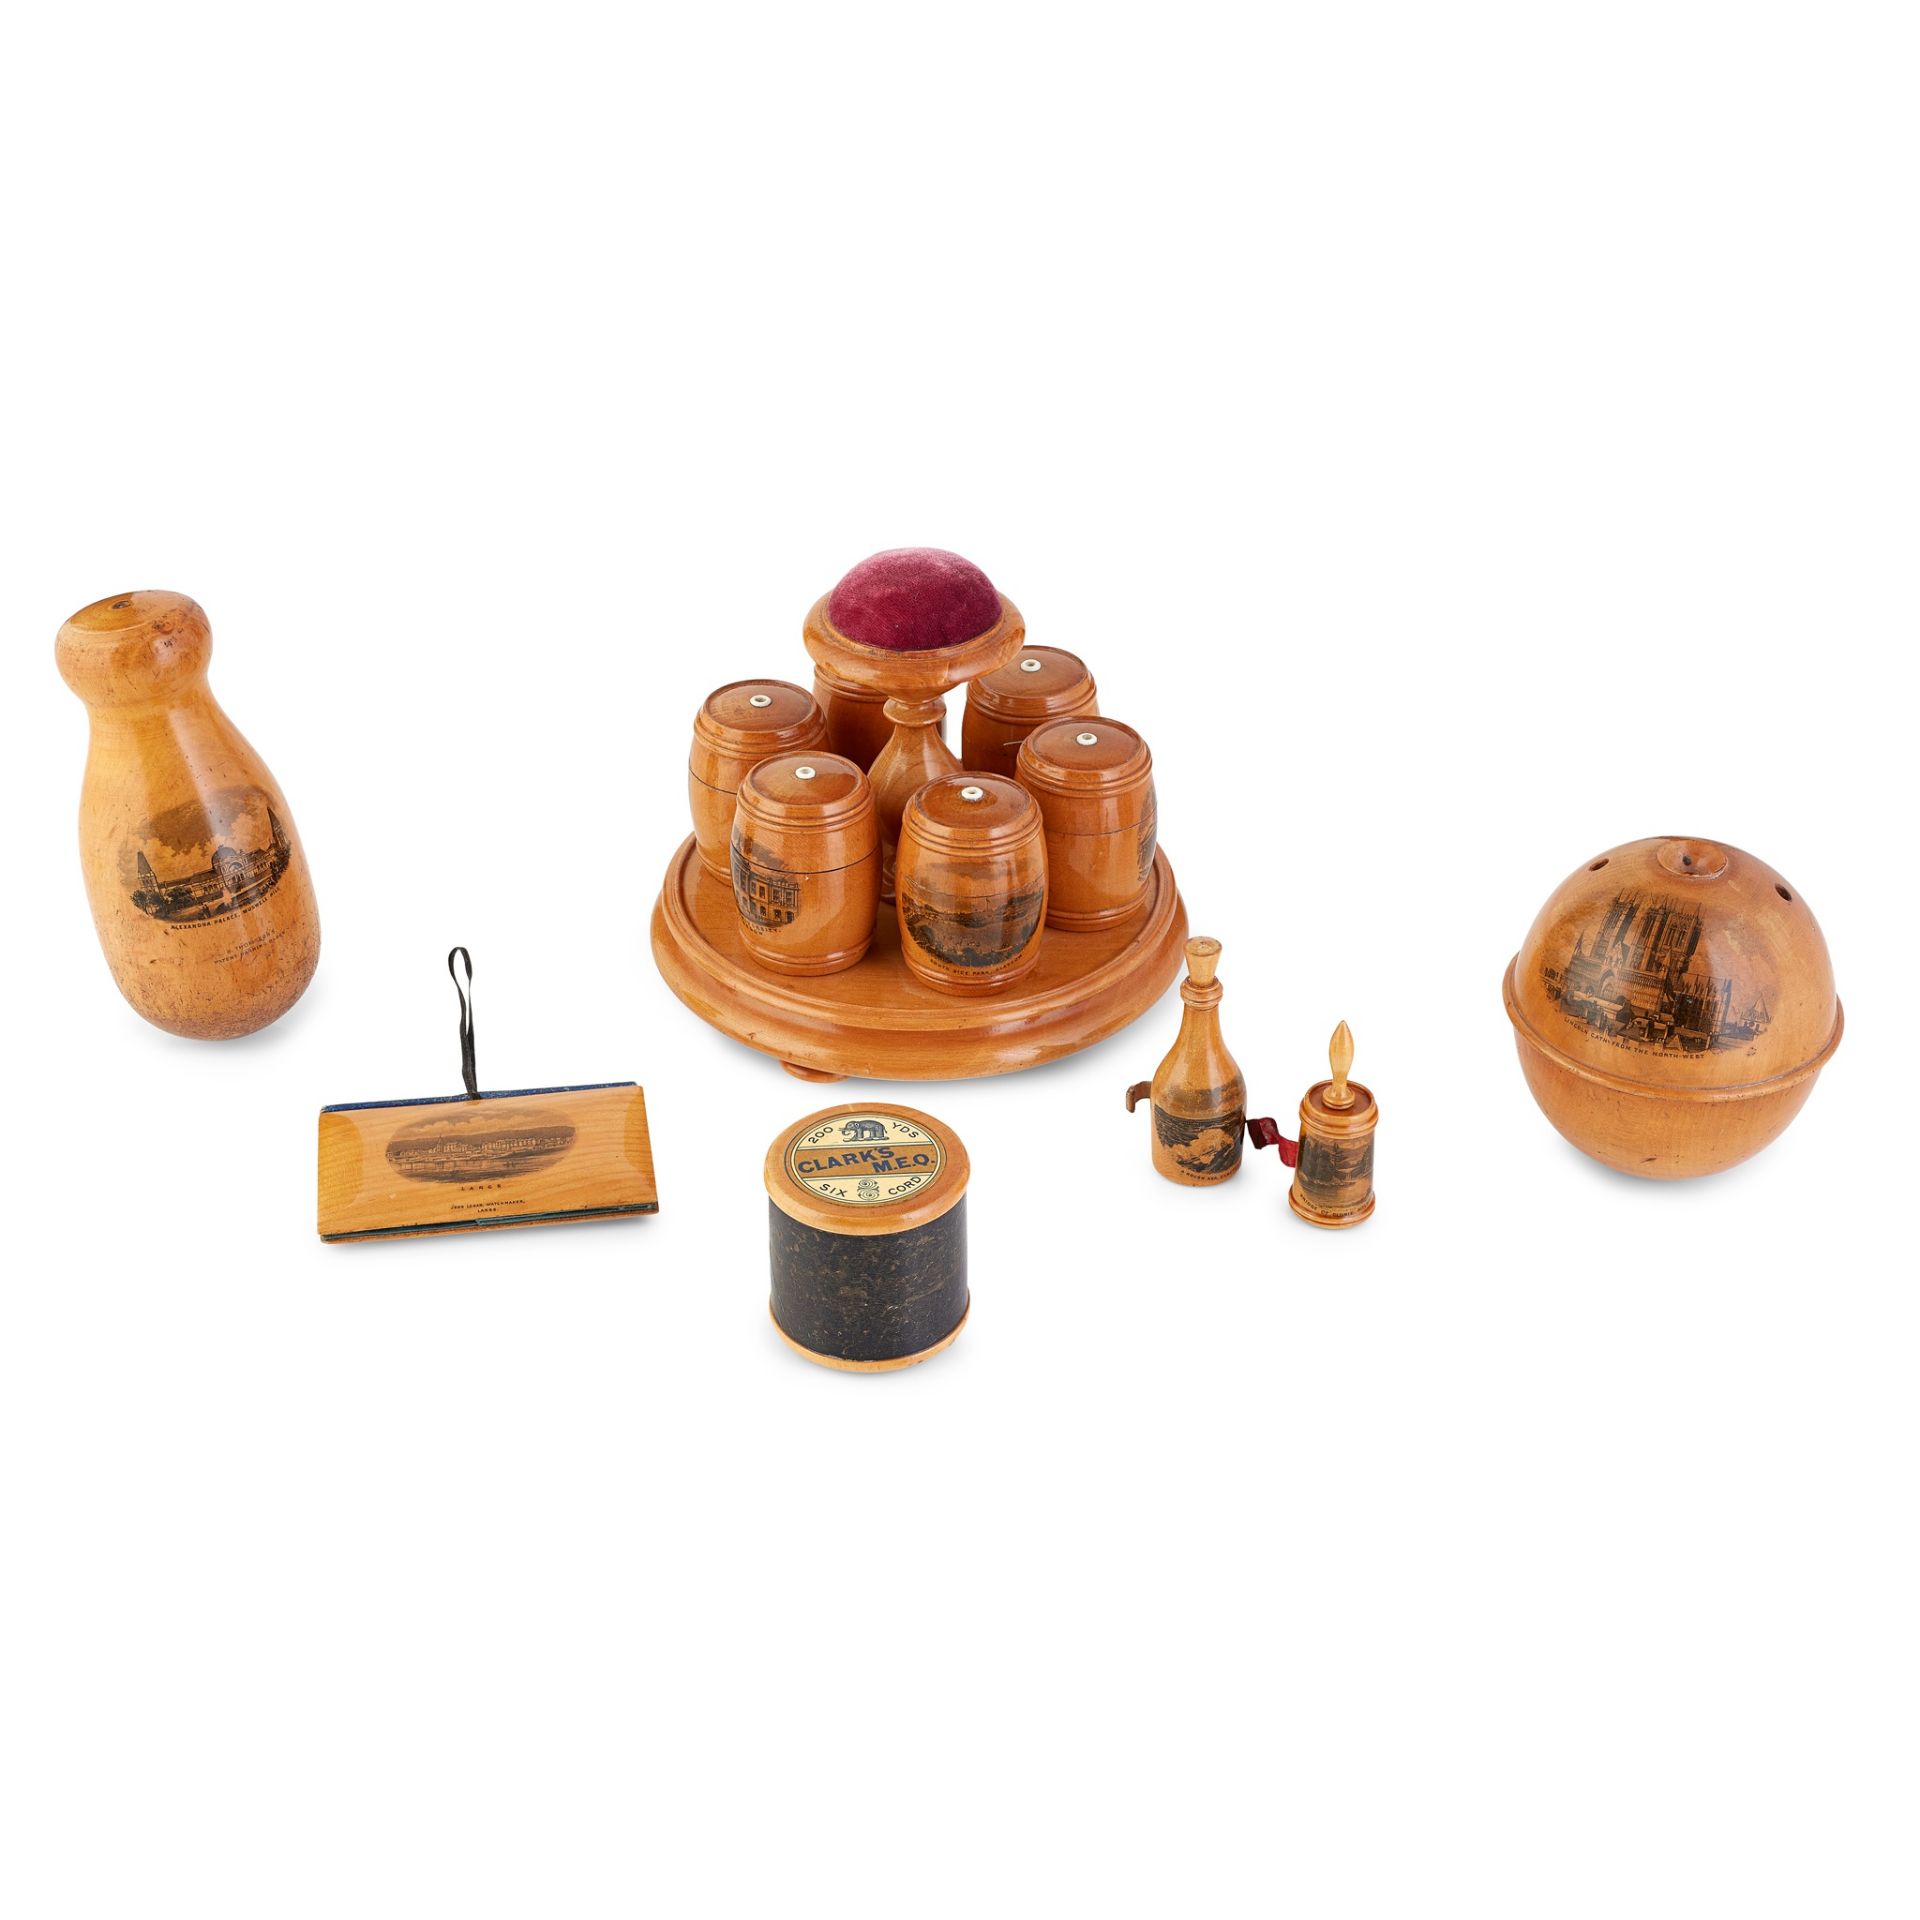 A GROUP OF MAUCHLINE WARE SEWING ITEMS LATE 19TH CENTURY